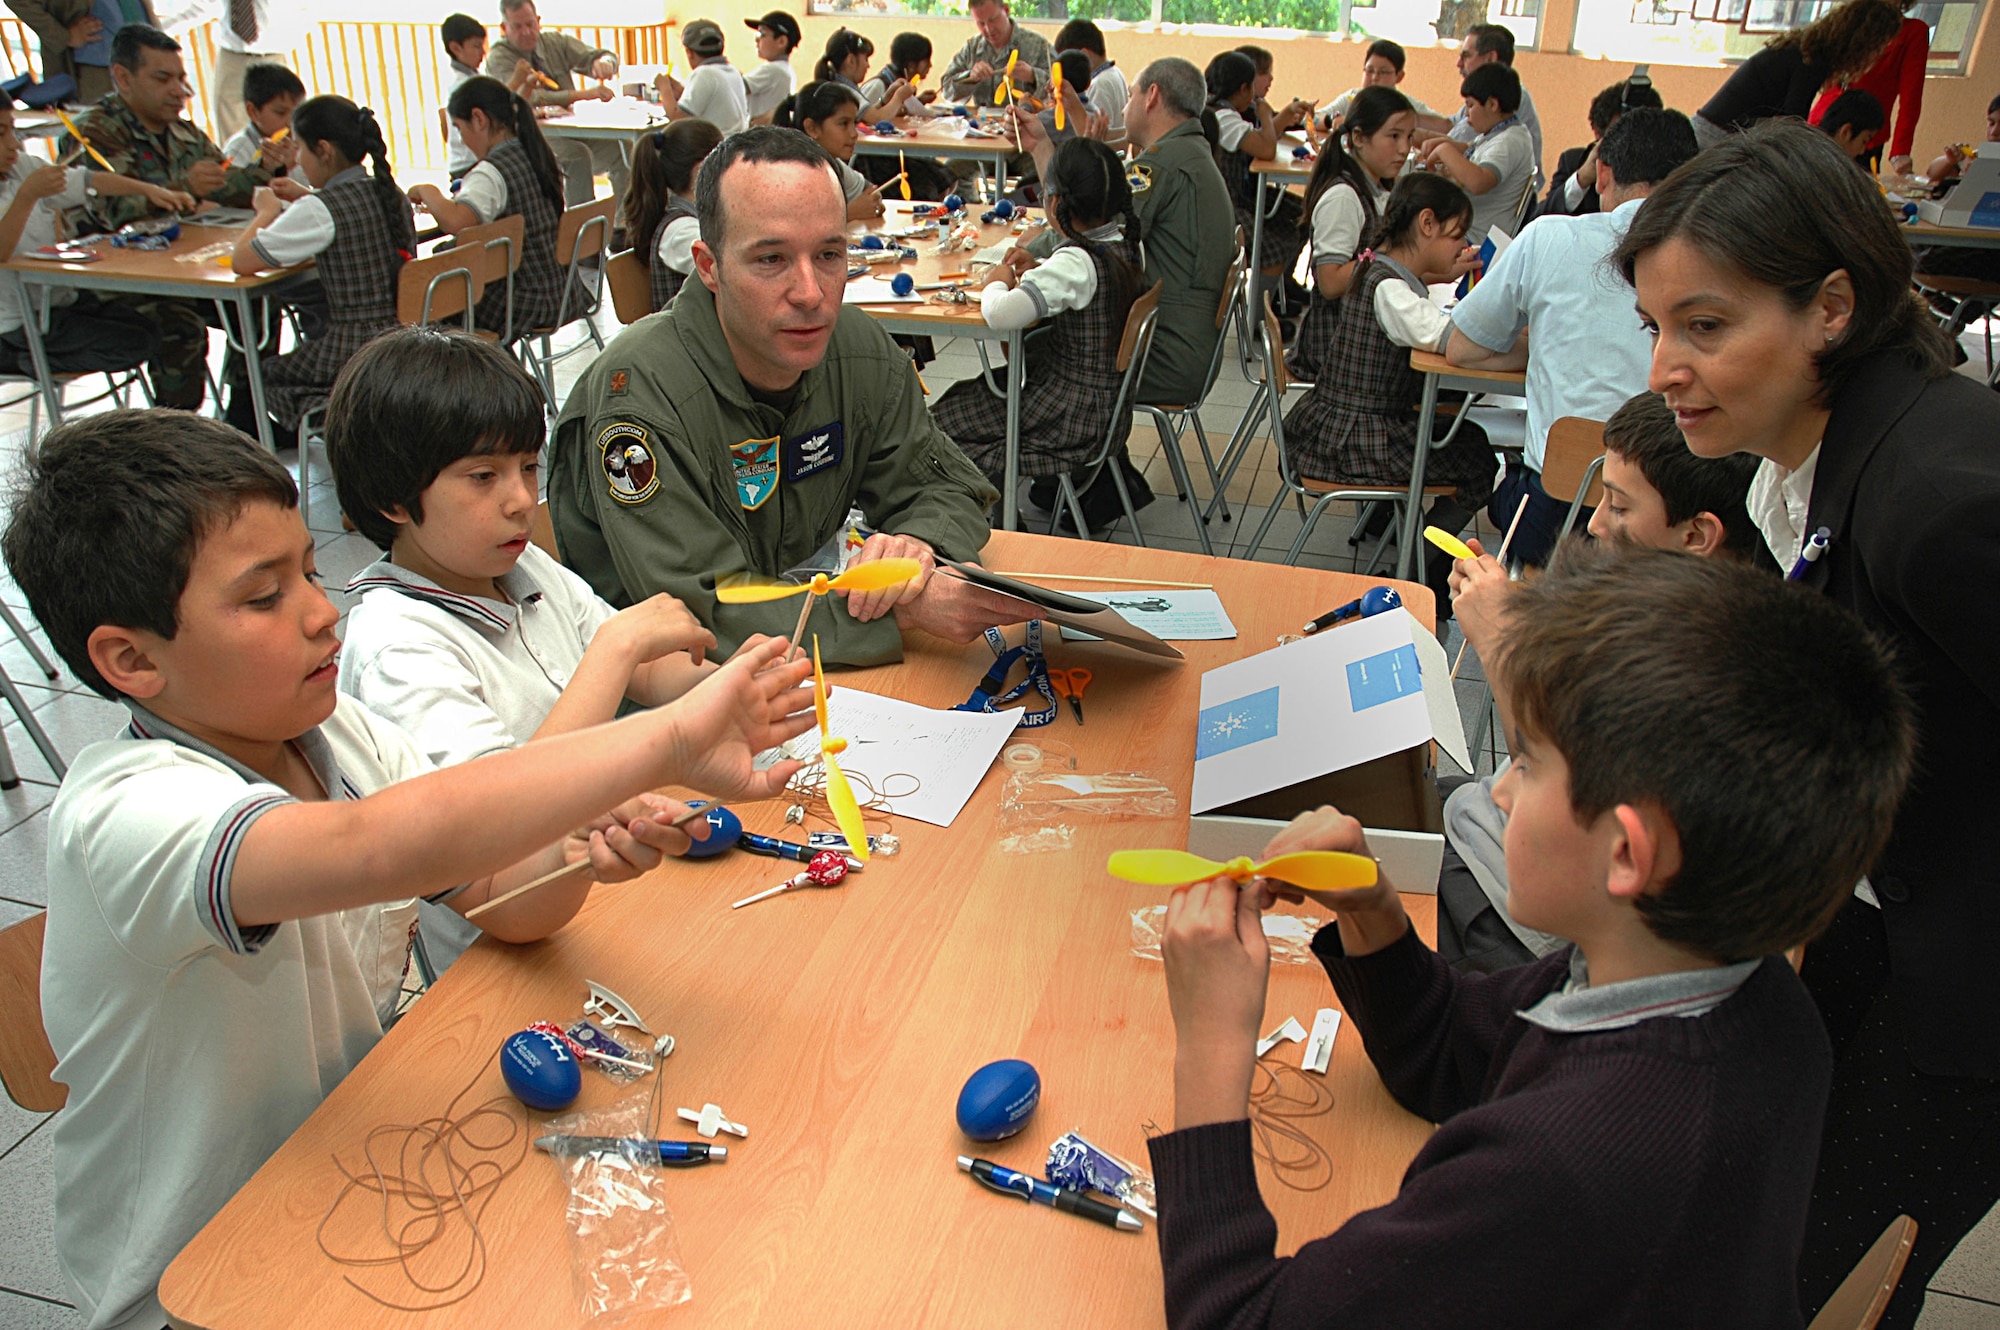 Maj. Jason Couisine, the Air Force section chief at the U.S. Military Group in Chile, assists a group of students at the Complejo Educacional Esperanza School in Santiago, Chile, during a community outreach event on Oct. 27. The model airplane kits were donated by a Silicon Valley technology company for use with Operation Southern Partner, an Air Forces Southern-led exchange aimed at providing intensive, periodic subject matter exchanges with partner nations in the U.S. Southern Command area of focus.  Included in the exchange is visits like this one where Airmen partnered with local U.S. Embassy volunteers, Chilean air force officers, members of the U.S. Military Group and volunteers from Agilent Technologies to teach children about the practical applications of the sciences.  (U.S. Embassy photo/Jose Nuños)